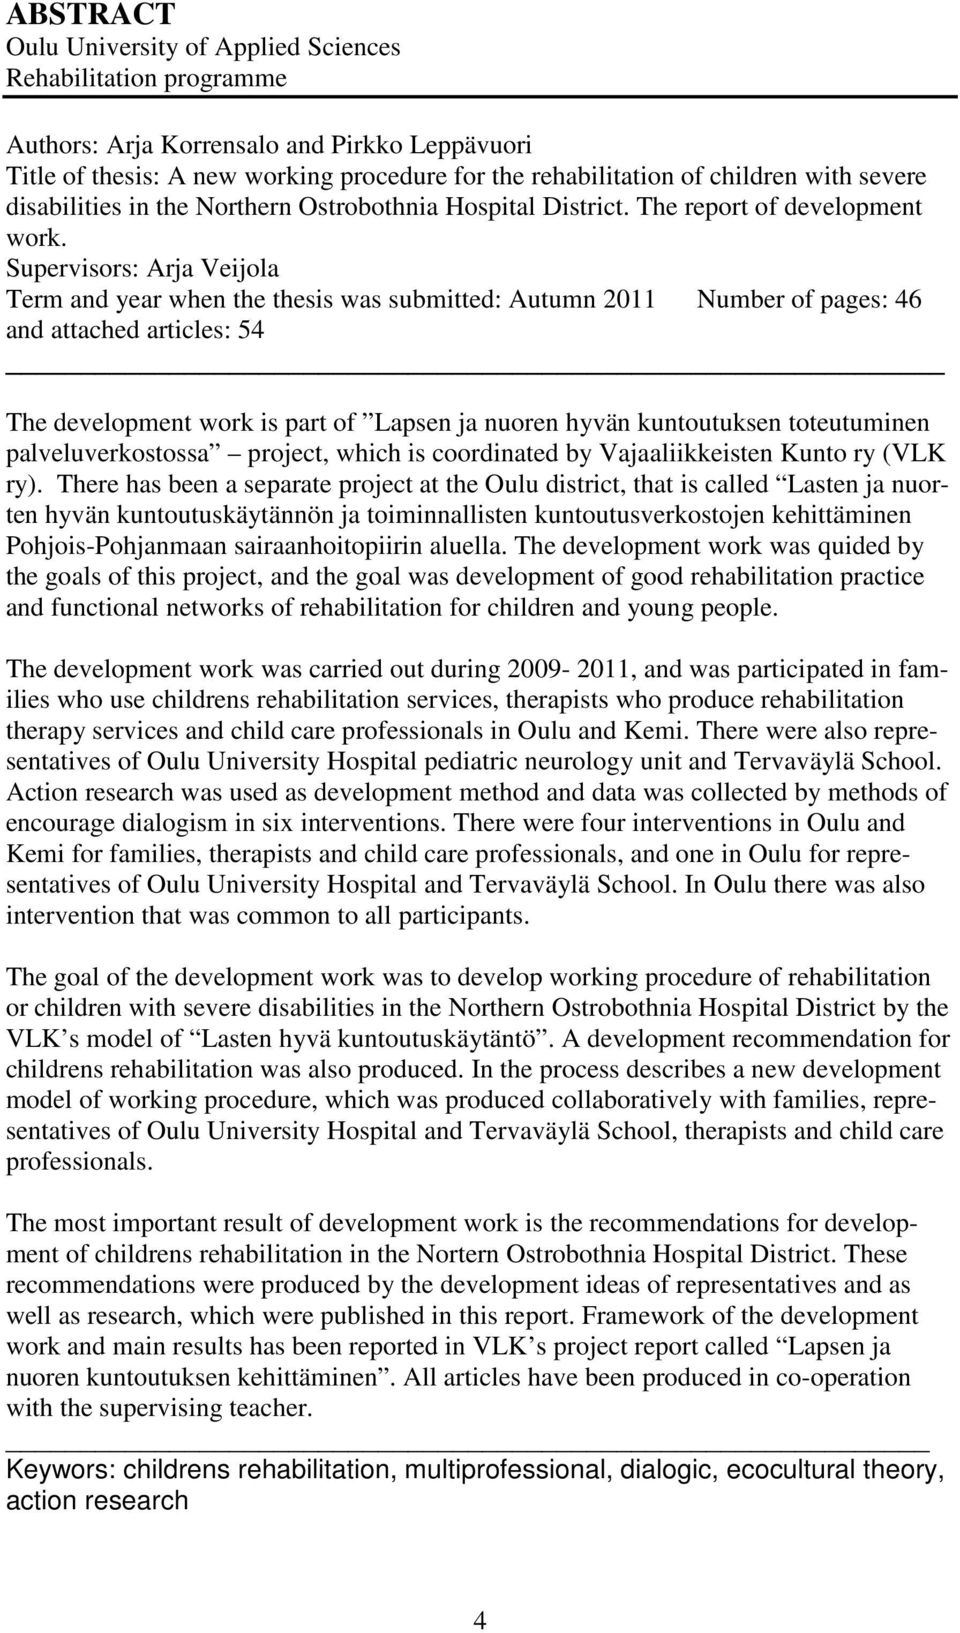 Supervisors: Arja Veijola Term and year when the thesis was submitted: Autumn 2011 Number of pages: 46 and attached articles: 54 The development work is part of Lapsen ja nuoren hyvän kuntoutuksen